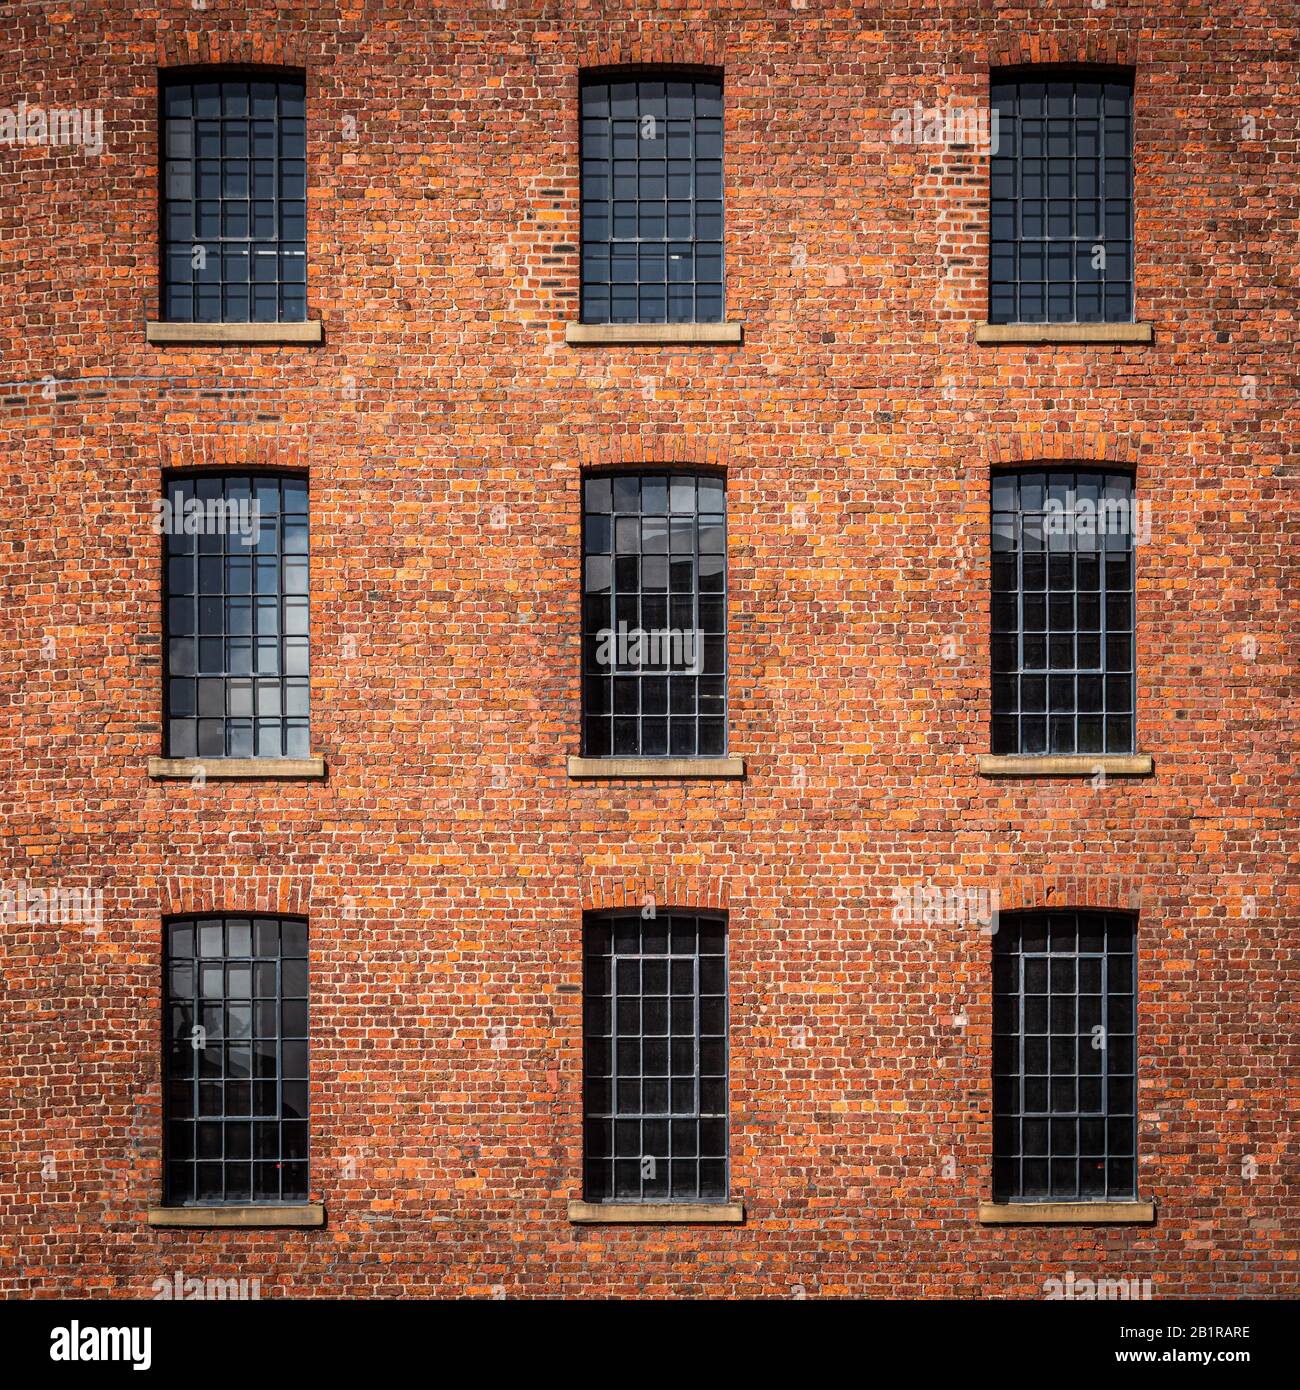 Details of the windows and brickwork in the old warehouse buildings at the Albert Docks in Liverpool Stock Photo